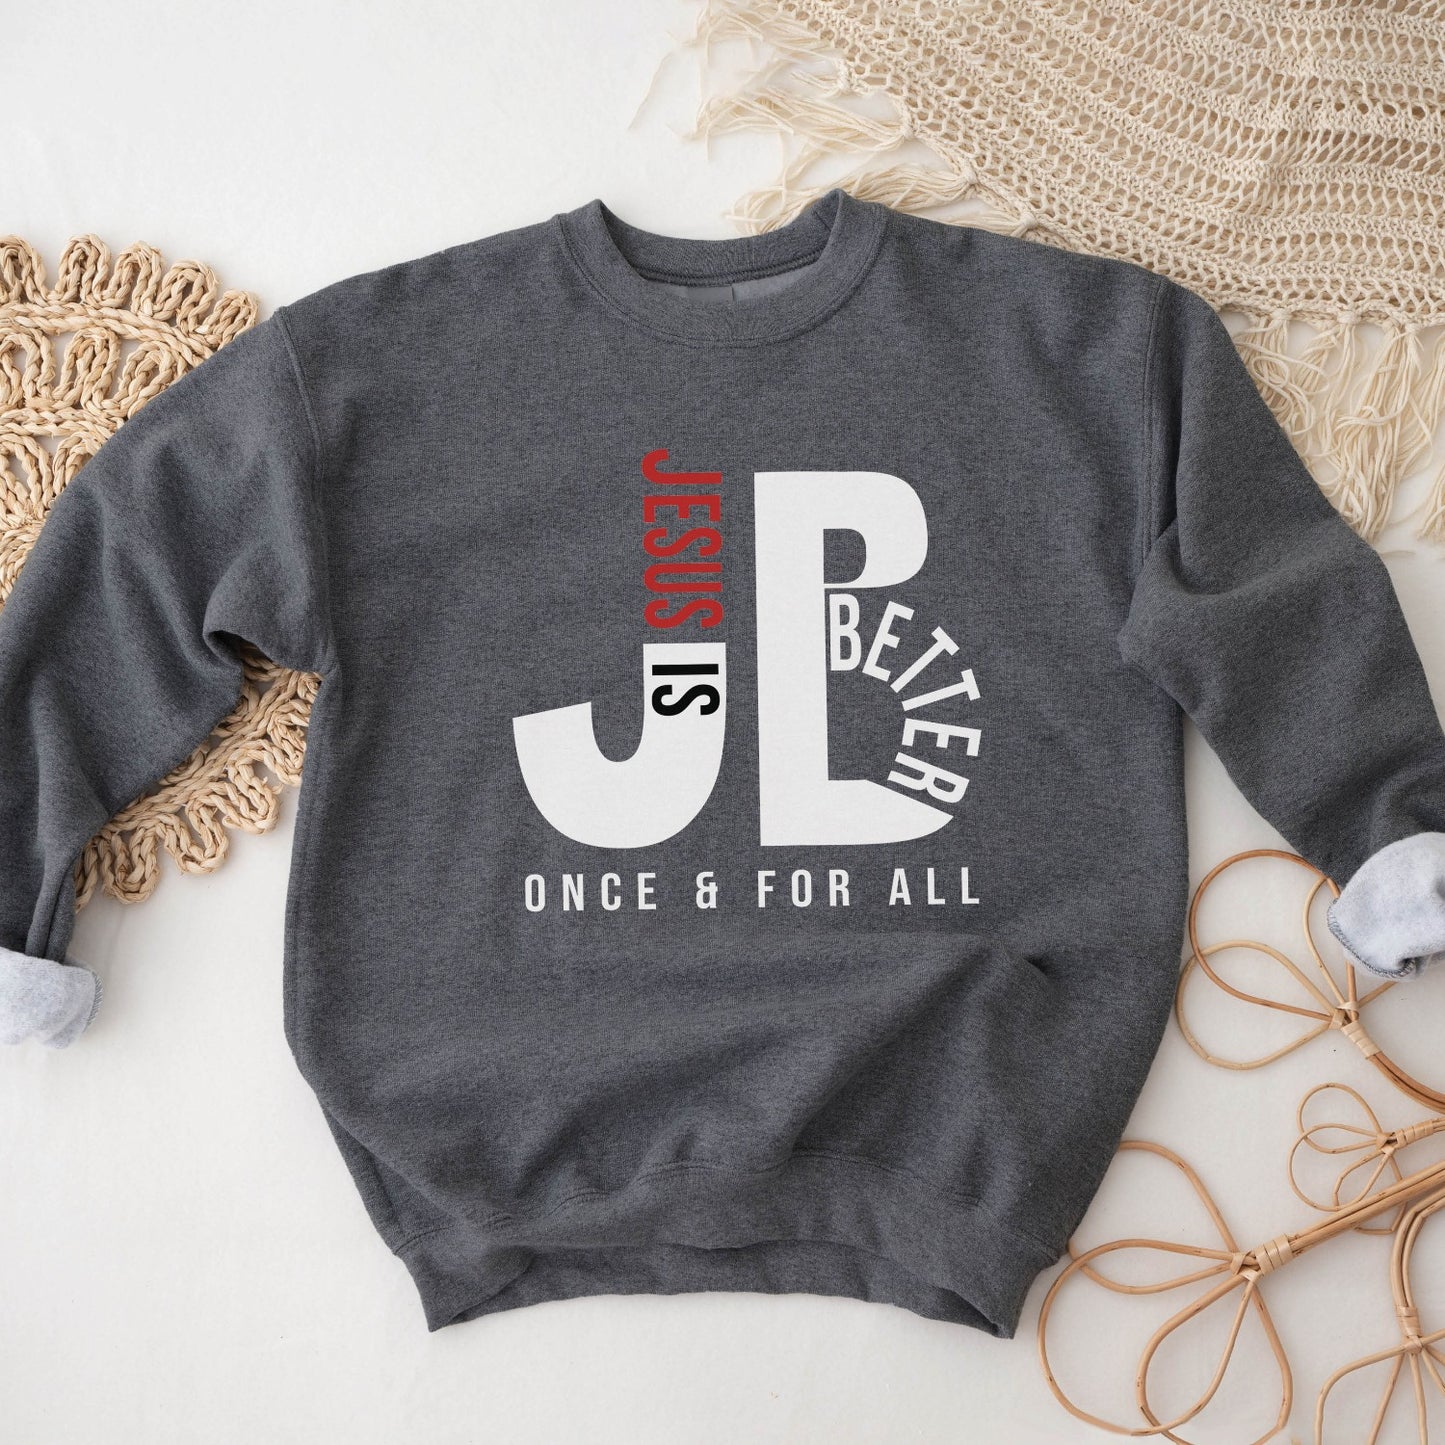 Cozy "JB" typography "Jesus is Better Once and For All" design in white and red letters, based on the Christian bible book of Hebrews, printed on a heather dark gray color Unisex crewneck sweatshirt, created for faith-based men and women